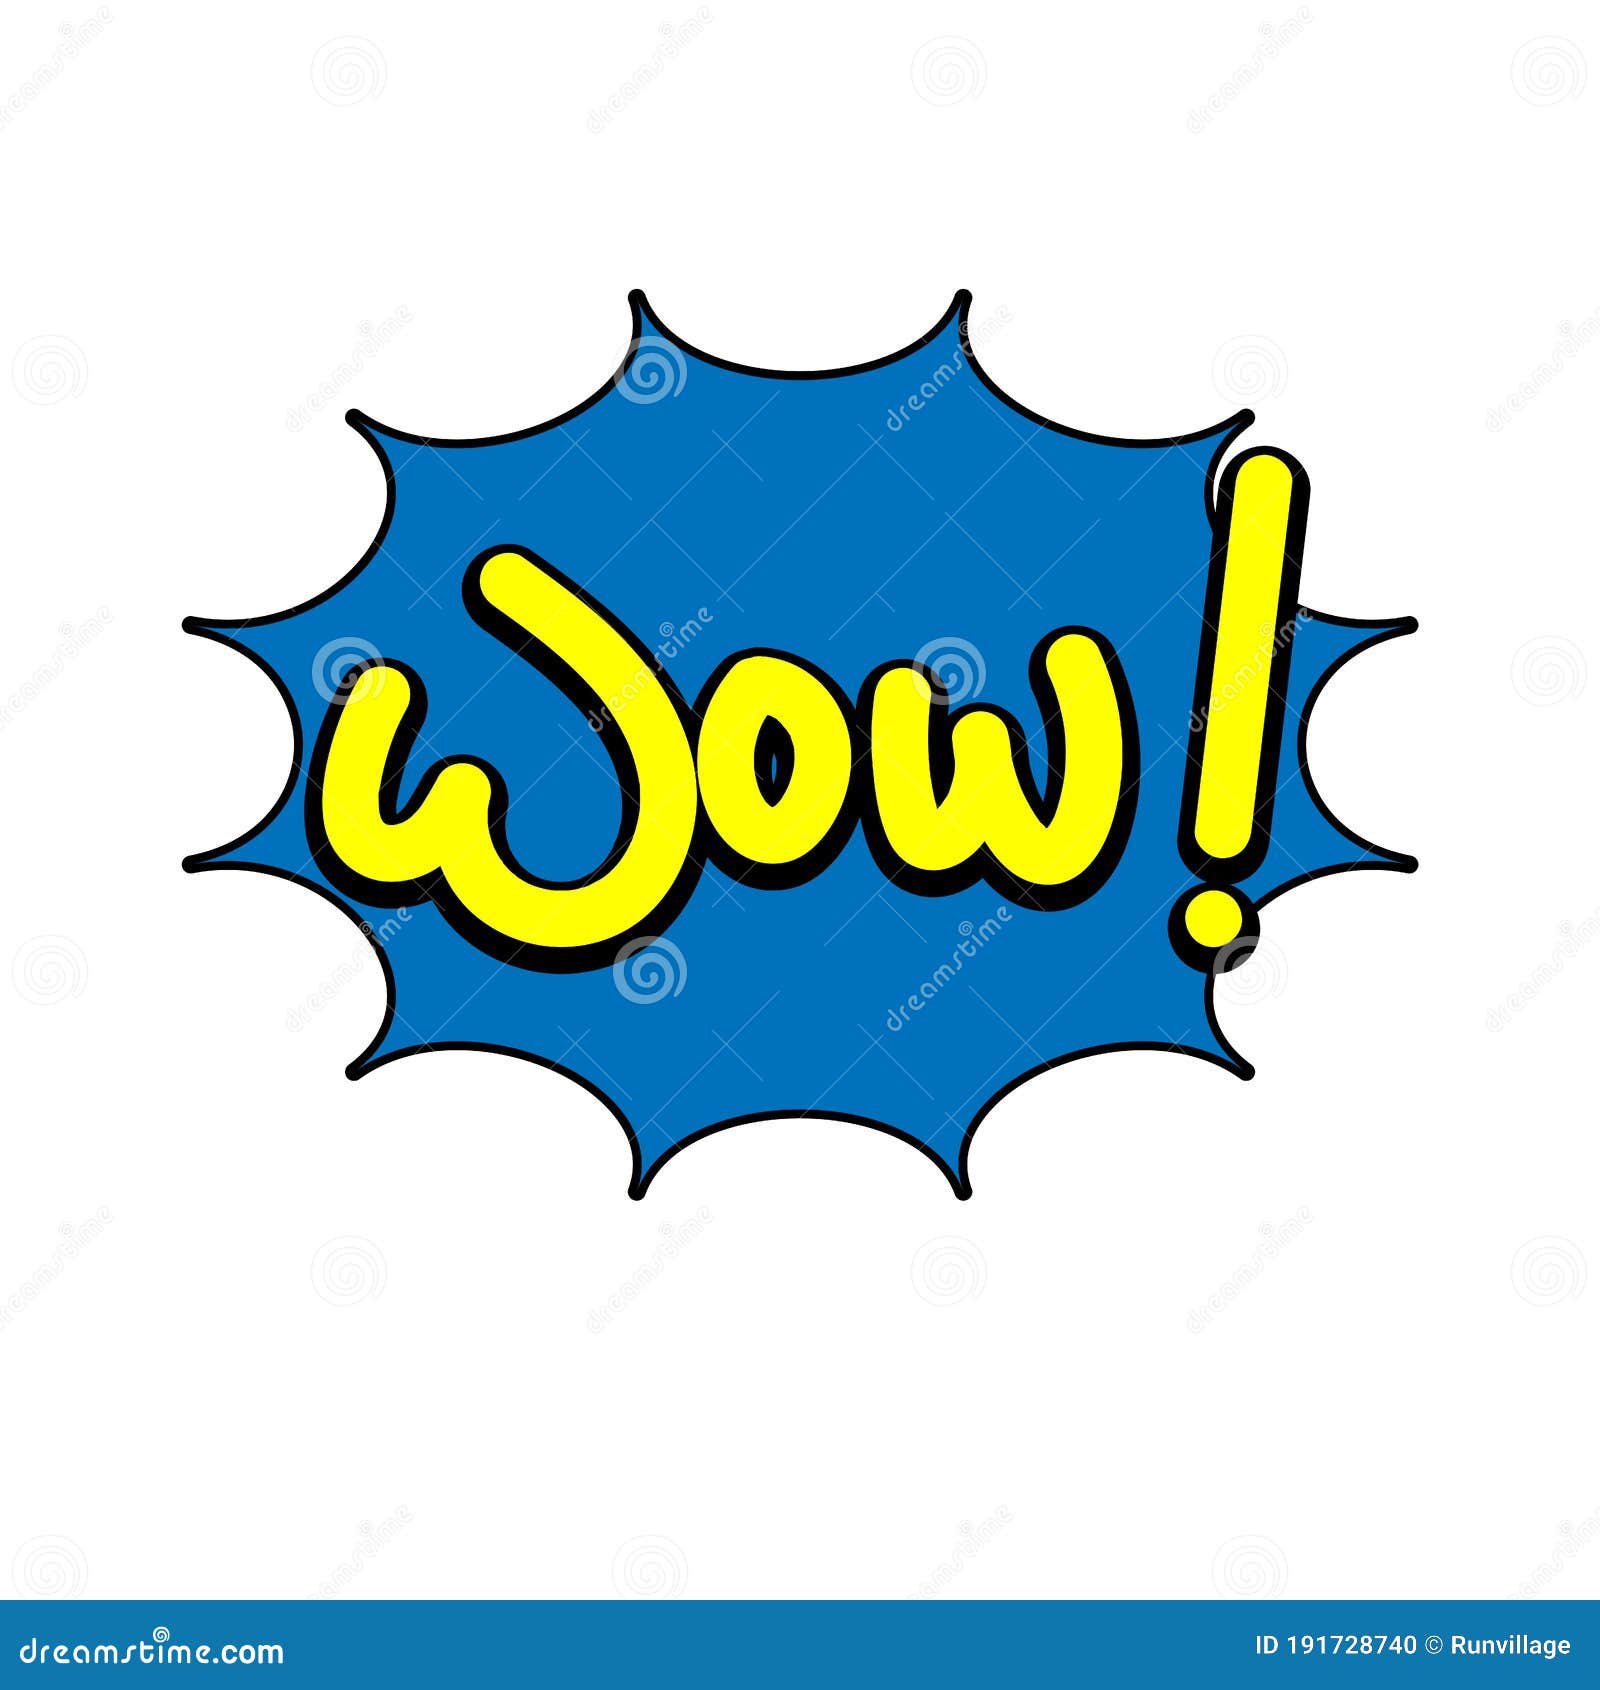 Cartoon Wow expression stock vector. Illustration of badge - 191728740